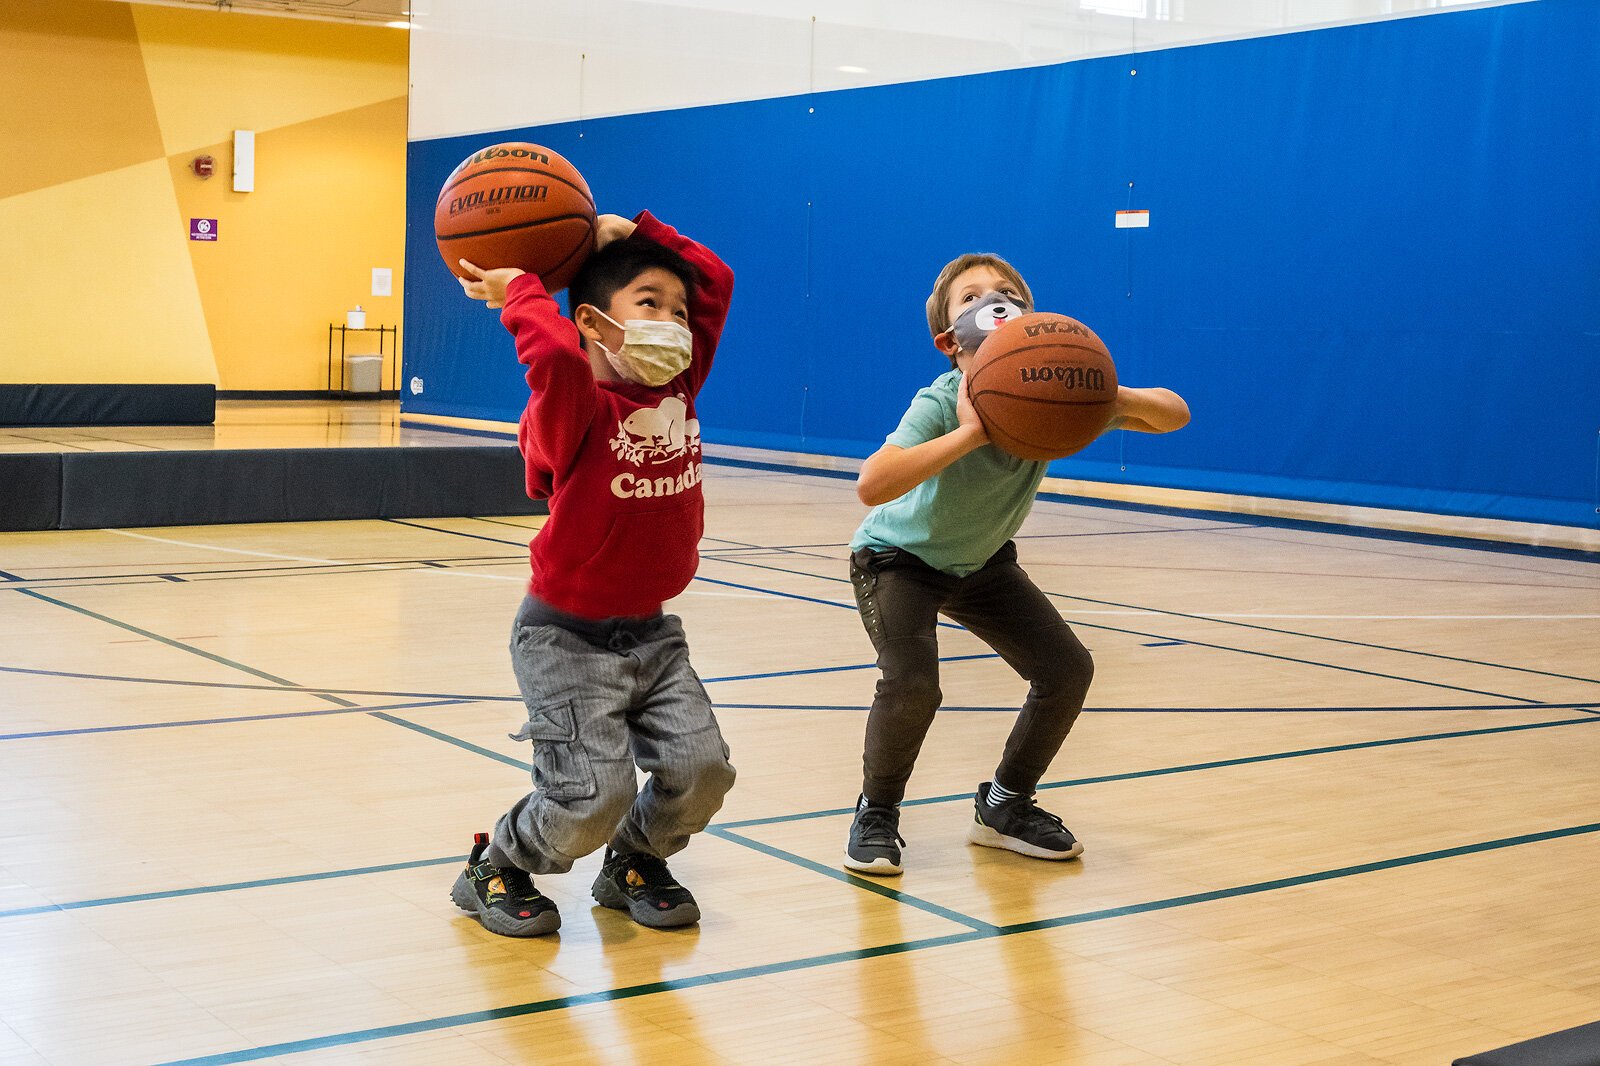 Children play at the Ann Arbor YMCA during Learning Labs programming.